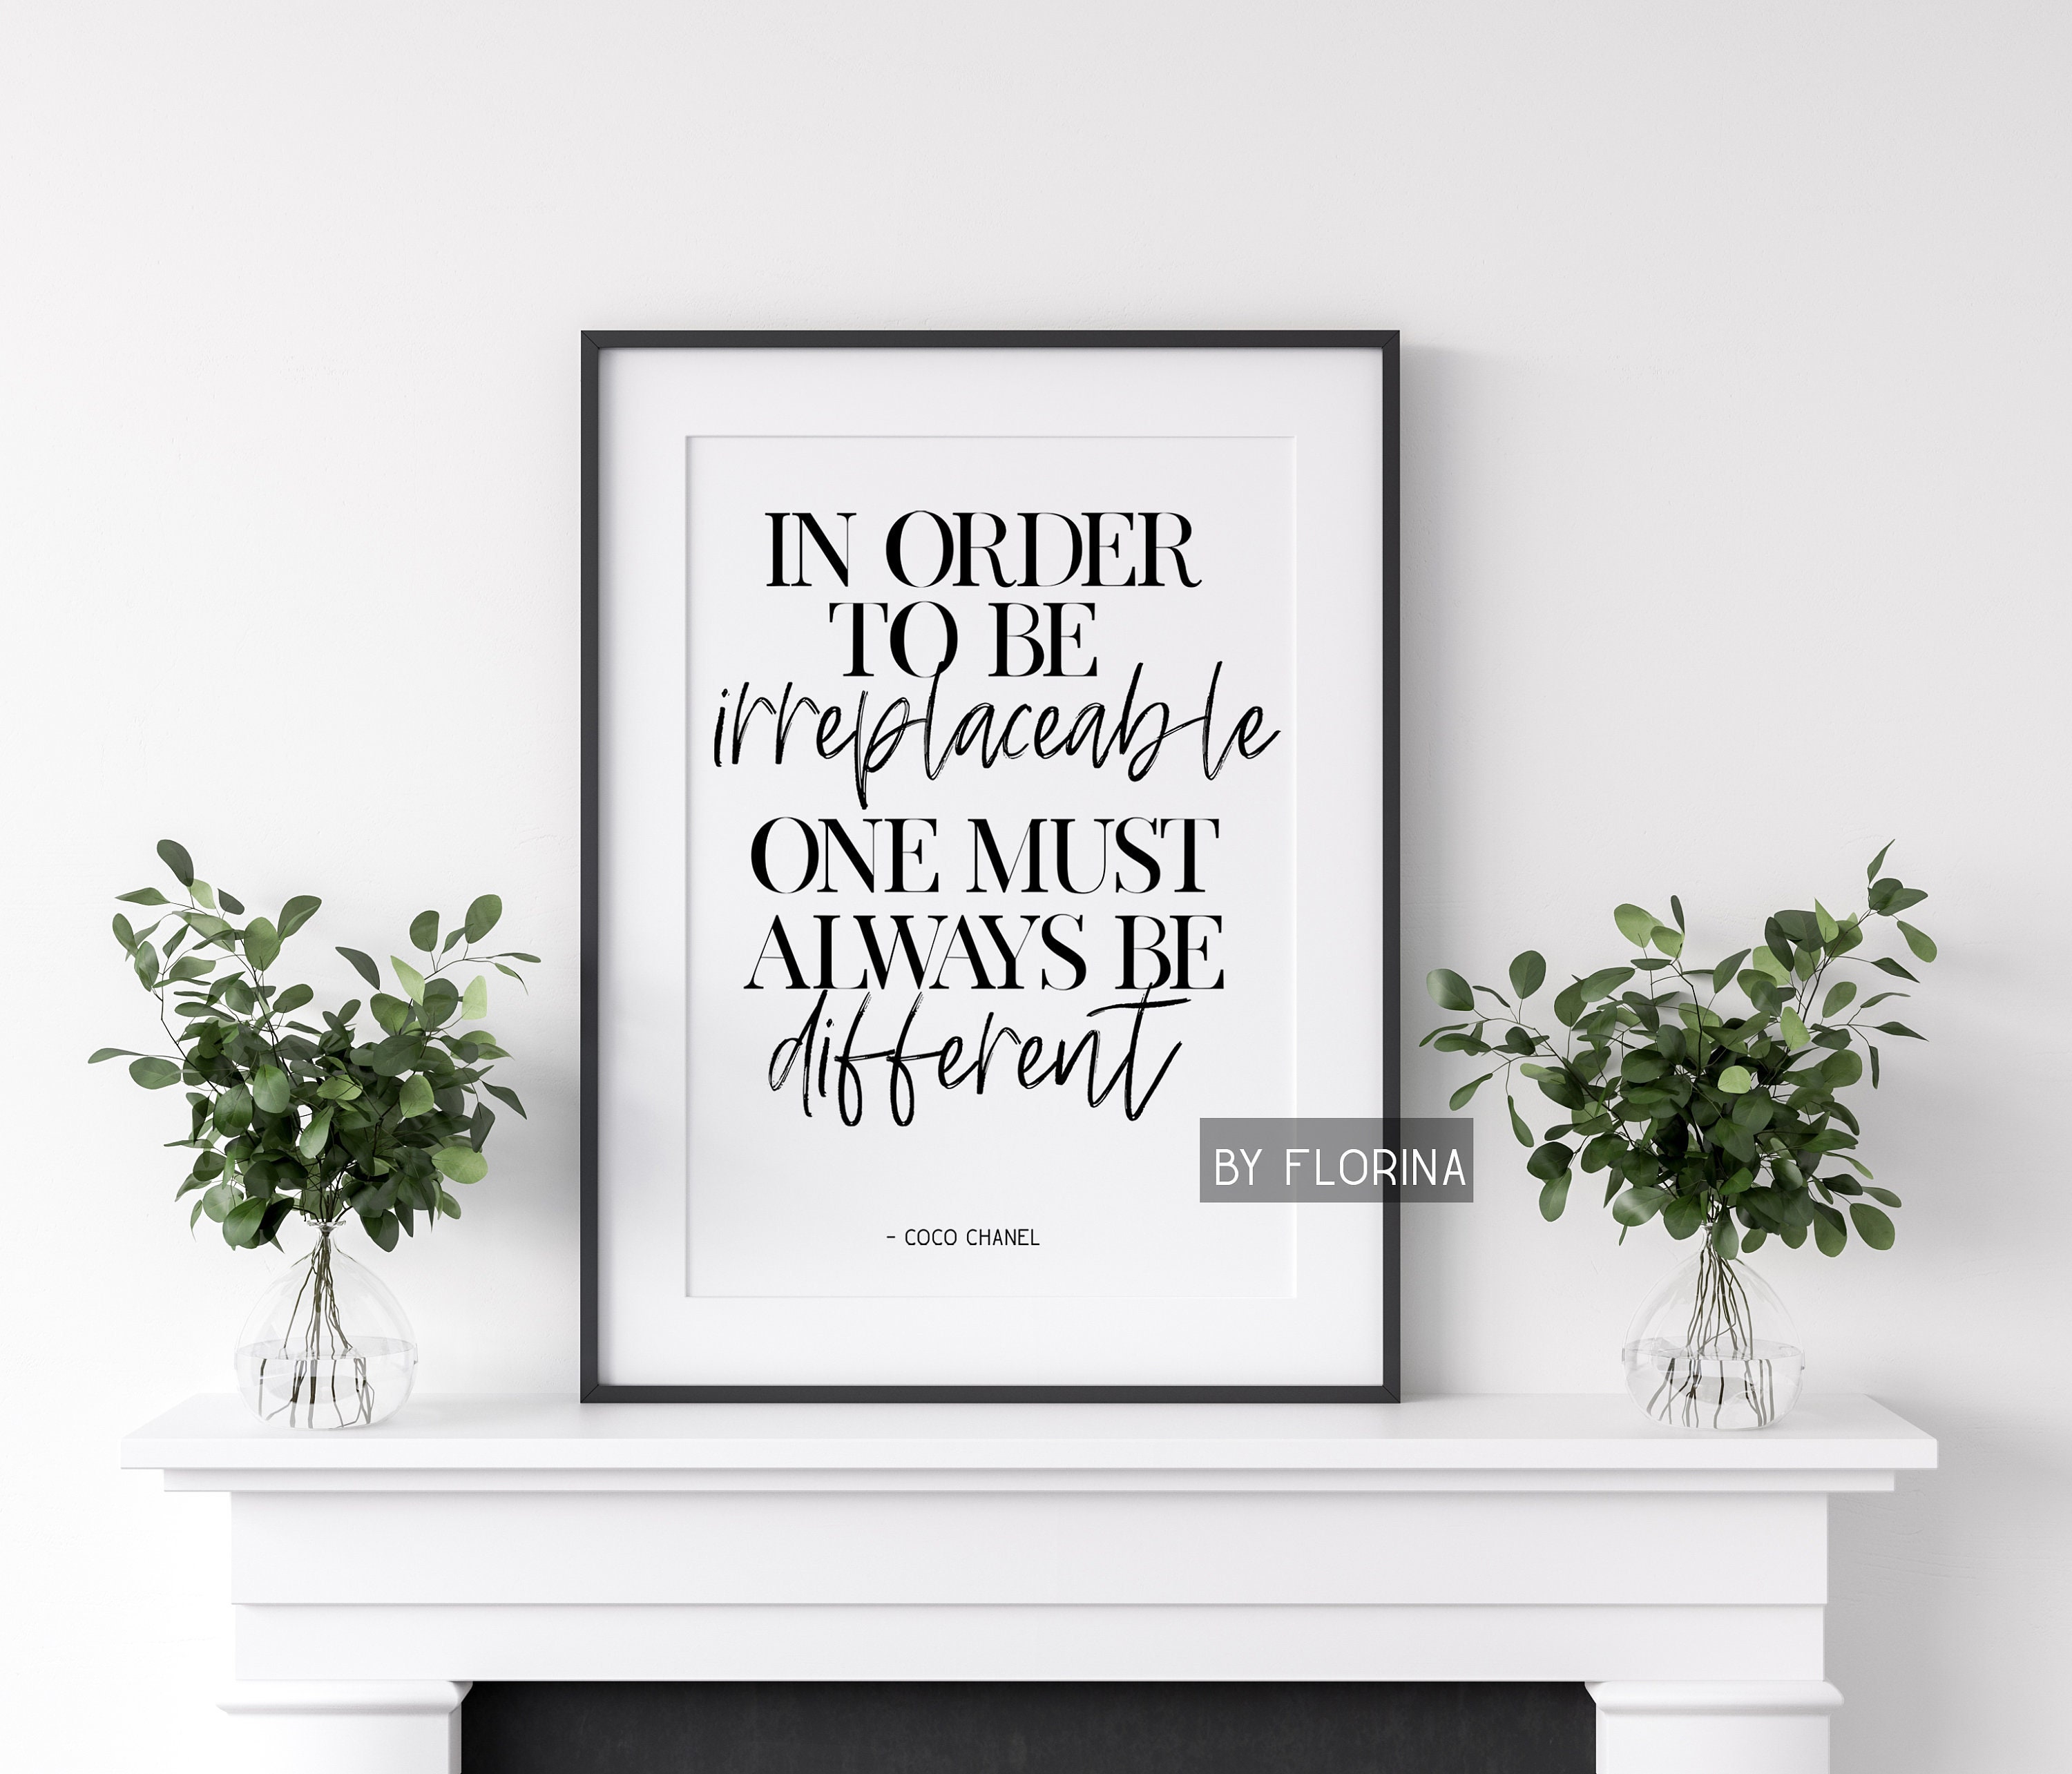 One must always be Different | Coco Chanel Quote Wall Art | 11x14 UNFRAMED  Black, White, Green Art Print | Contemporary, Positive, Inspirational